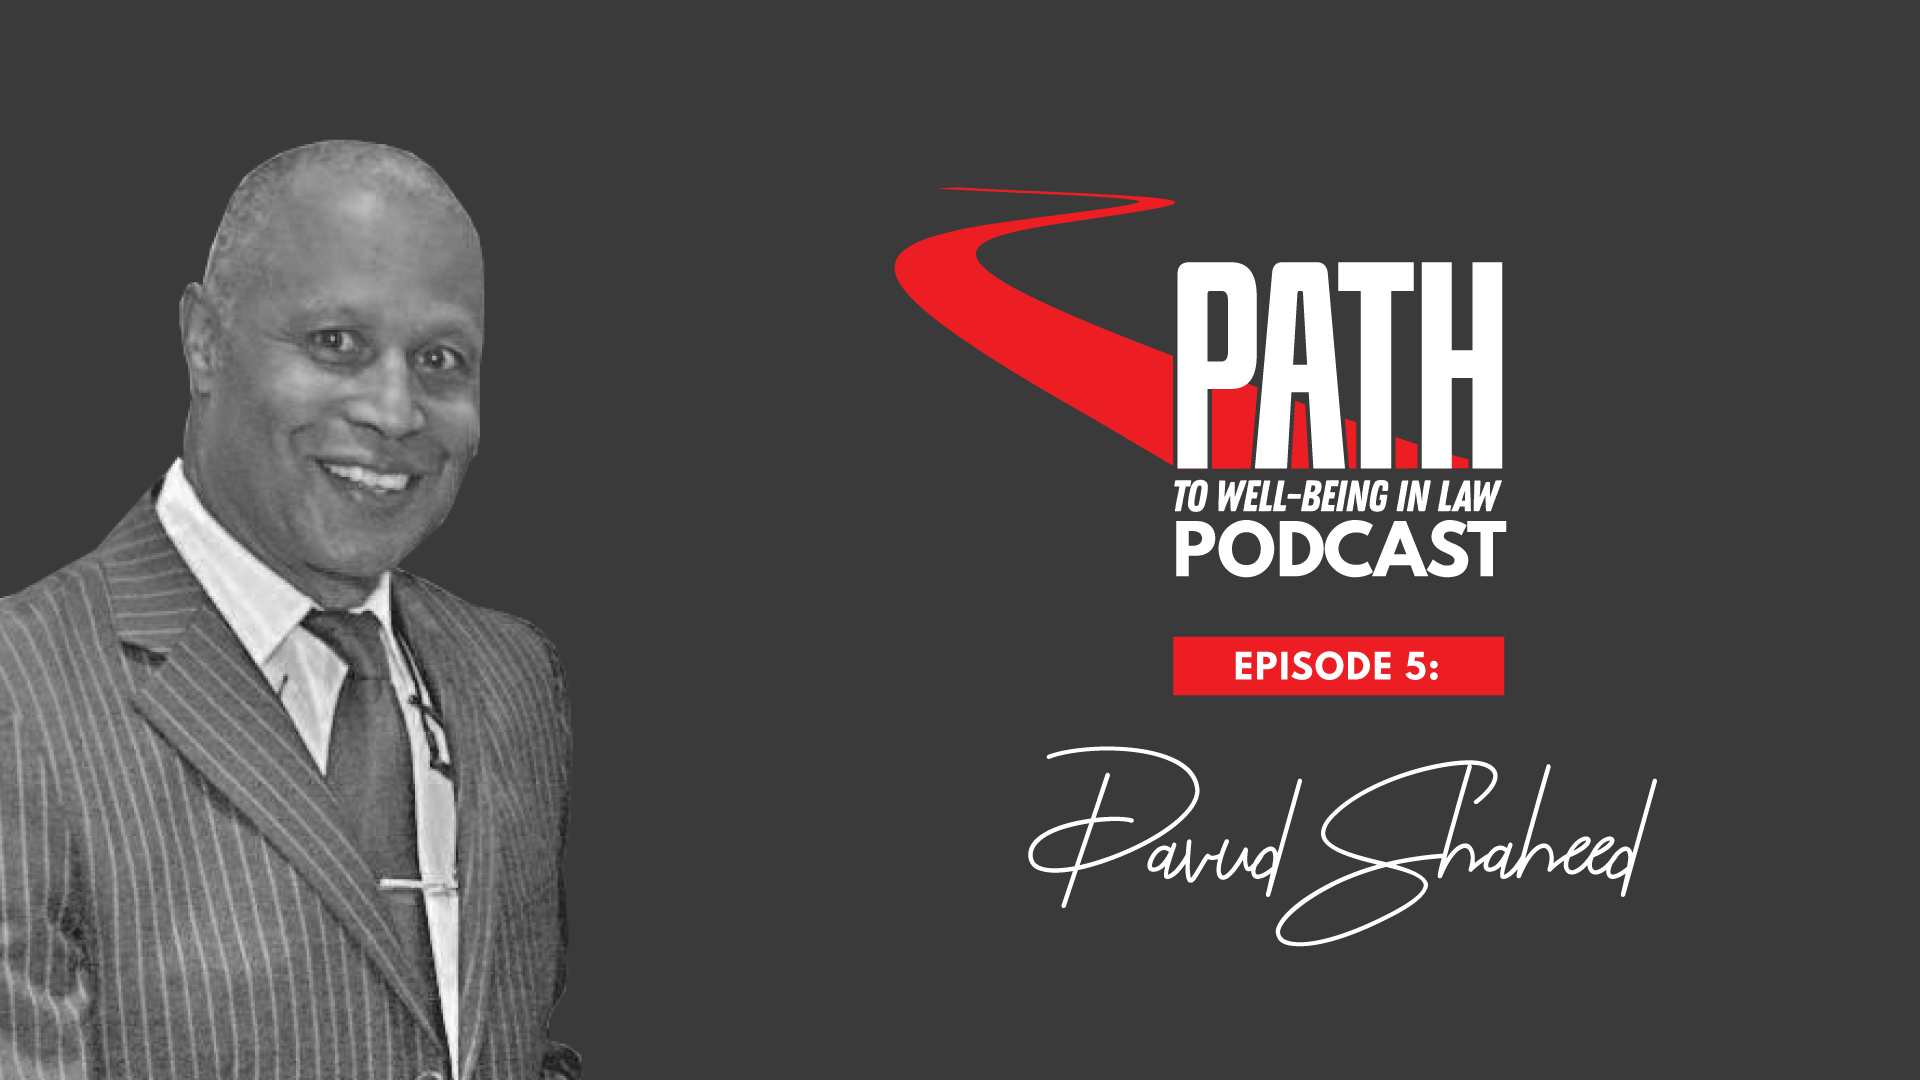 Path To Well-Being In Law Podcast: Episode 5 - Judge David Shaheed